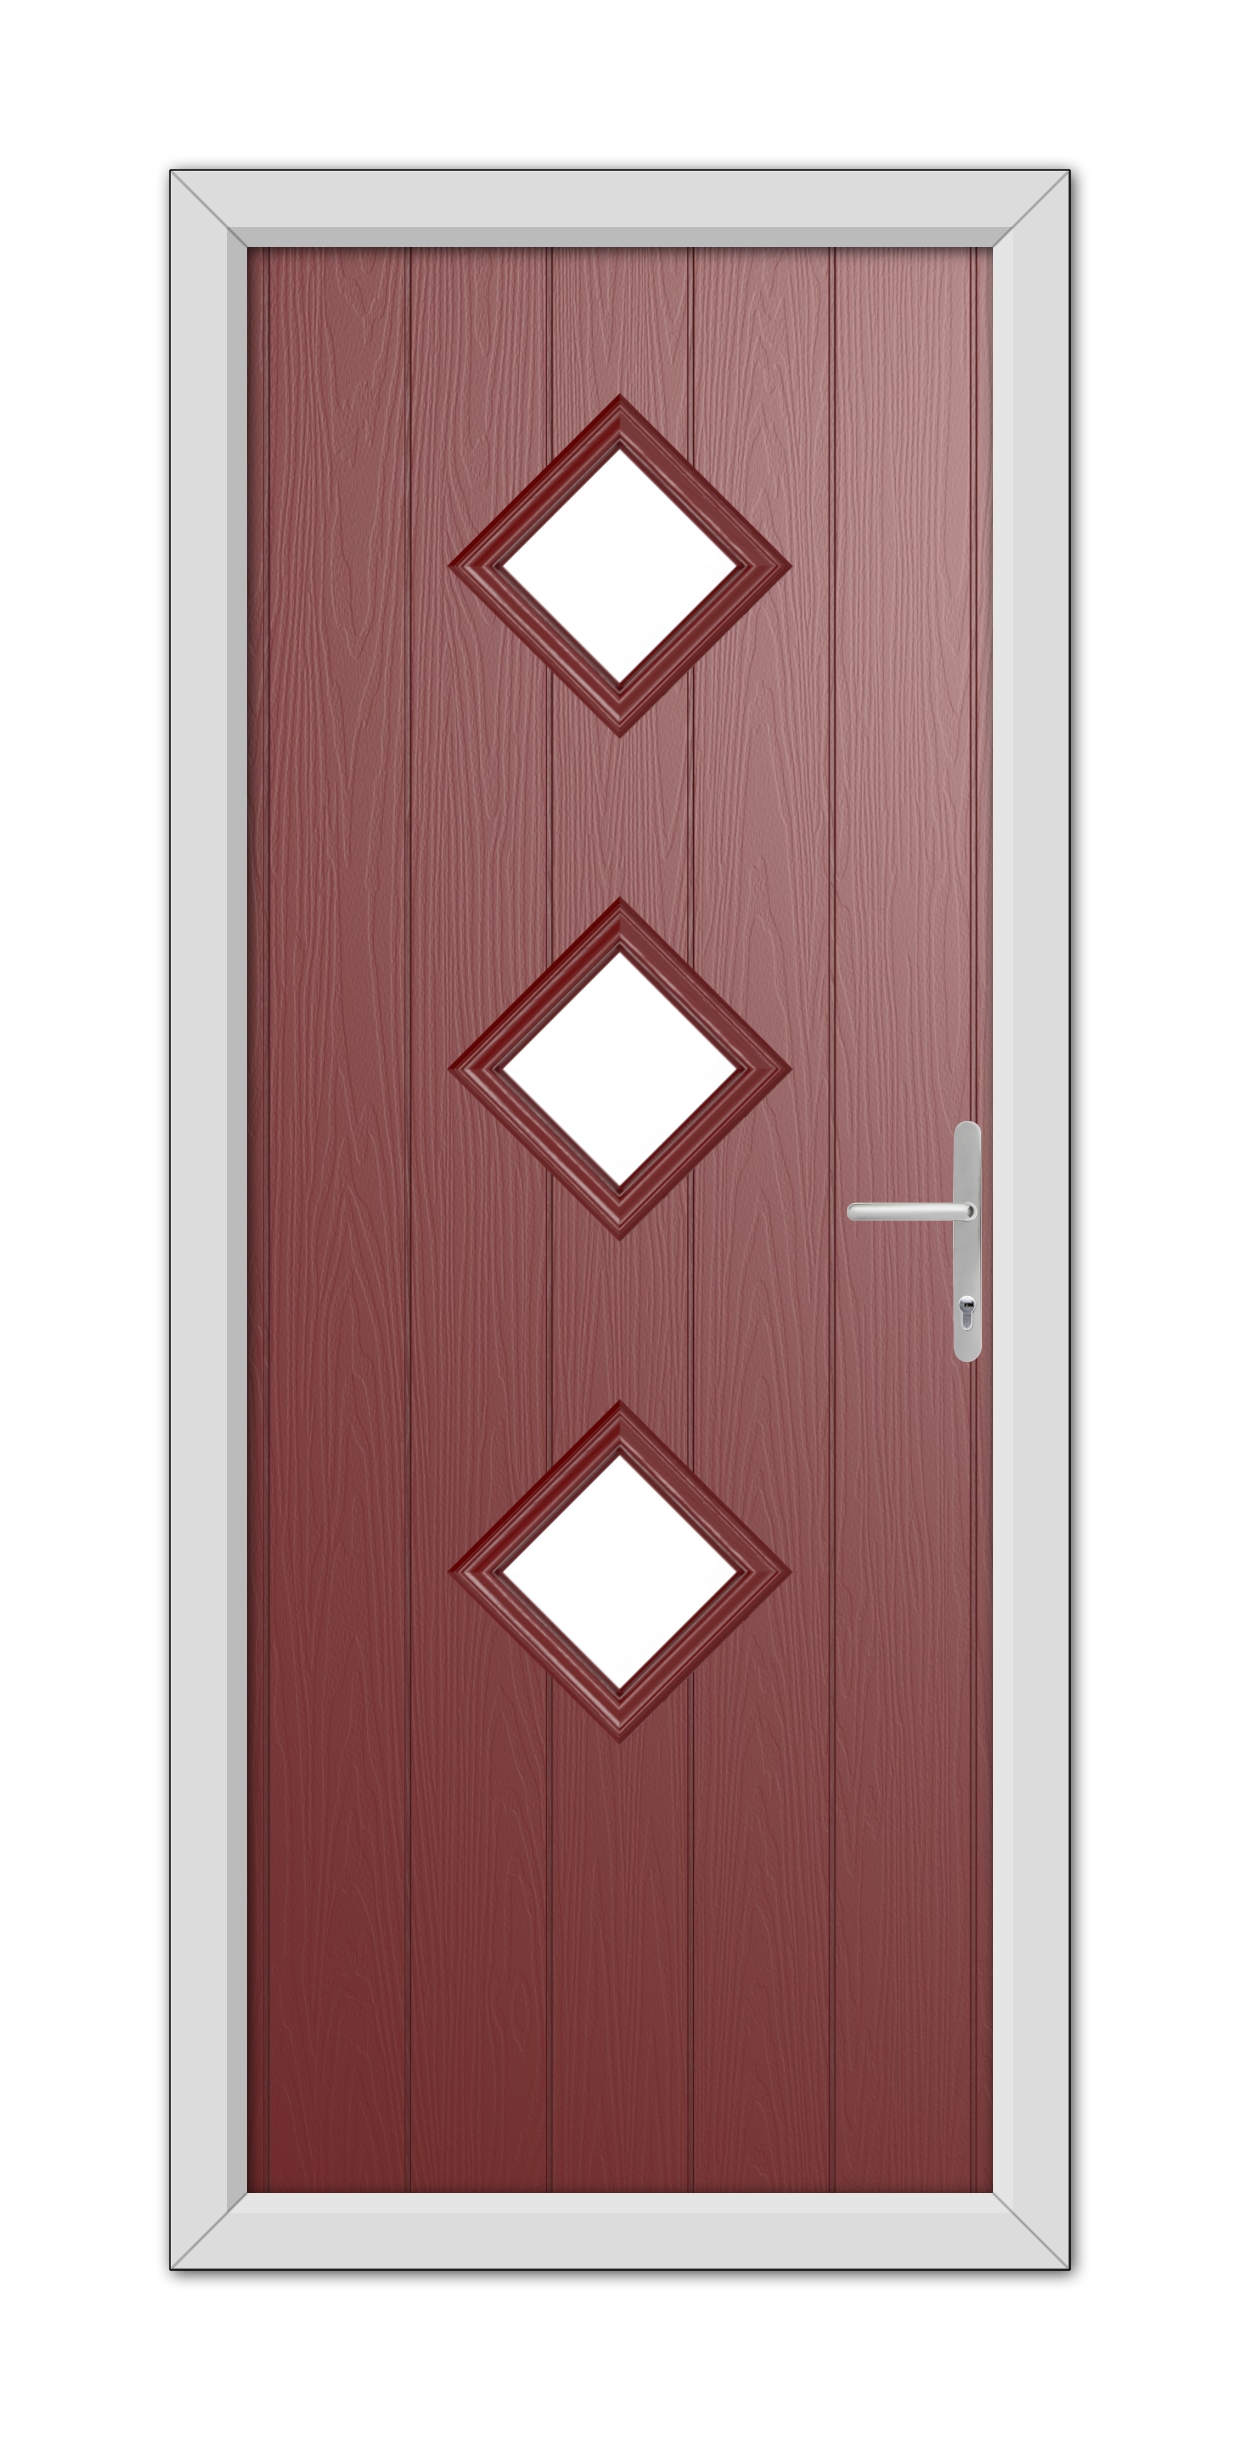 A modern Red Richmond Composite Door 48mm Timber Core with three diamond-shaped windows and a silver handle, set within a white frame.